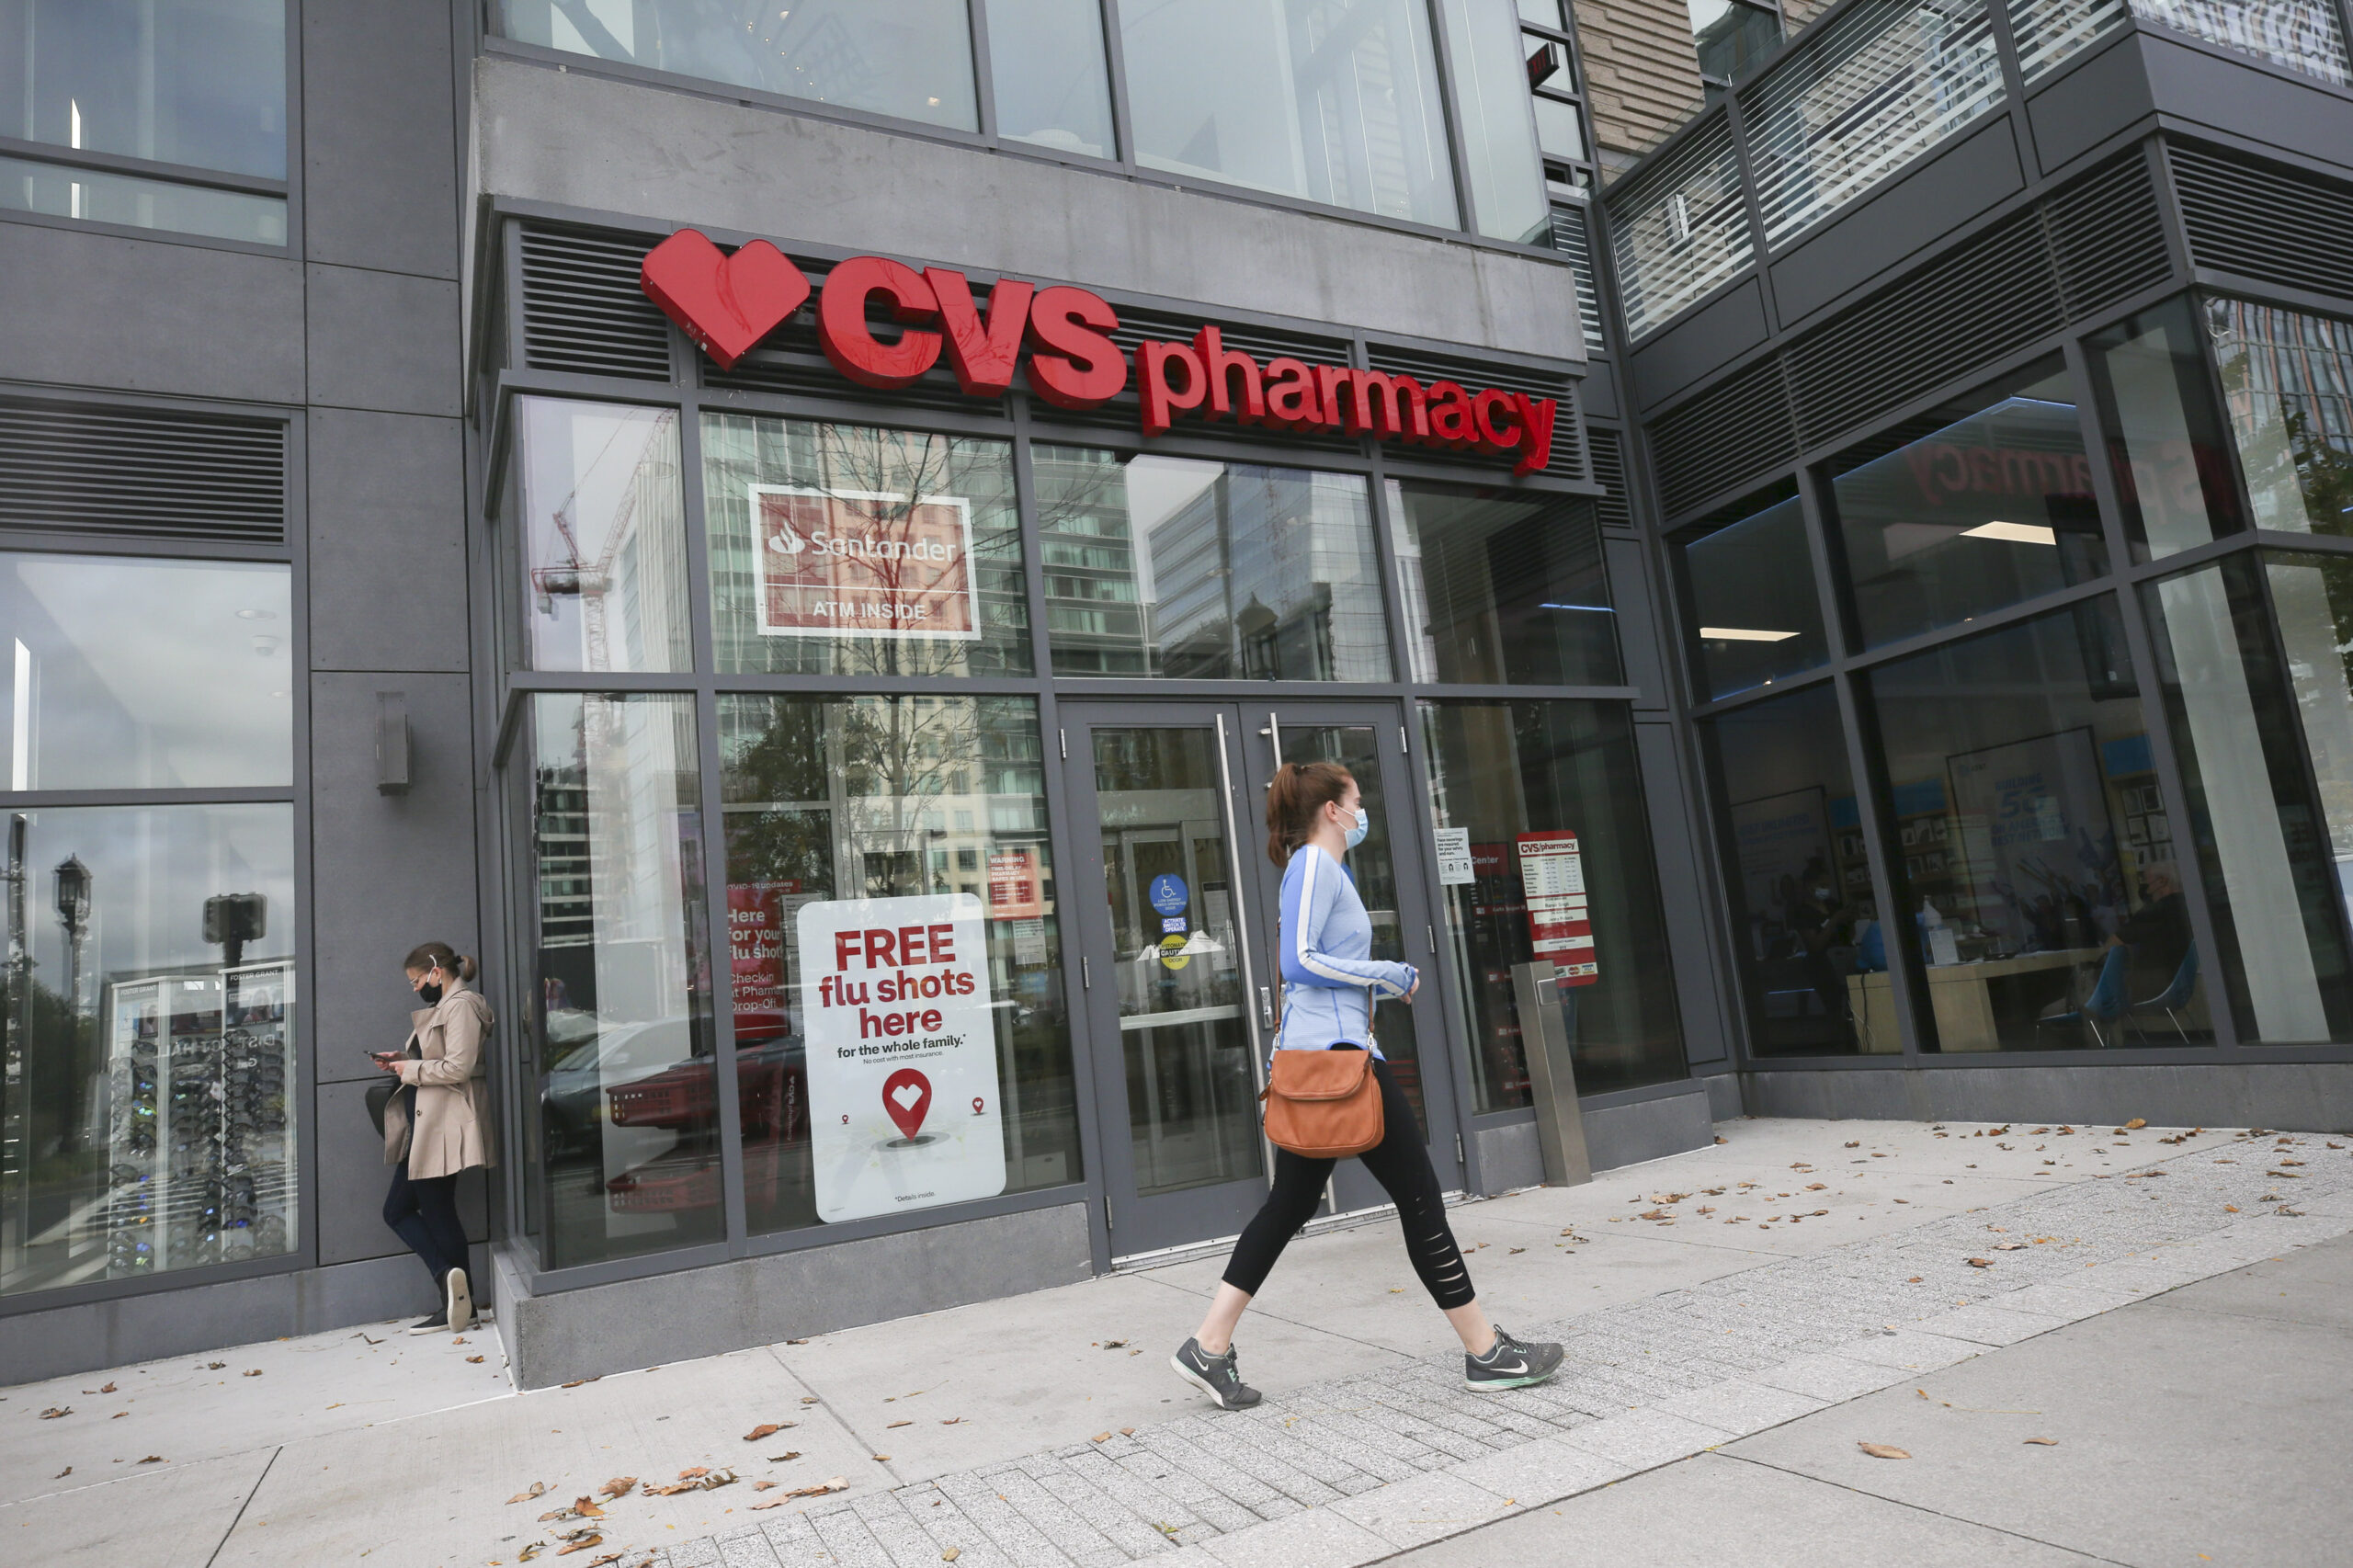 CVS Pharmacy defends policy after Christian nurse fired for refusing to prescribe contraception drugs